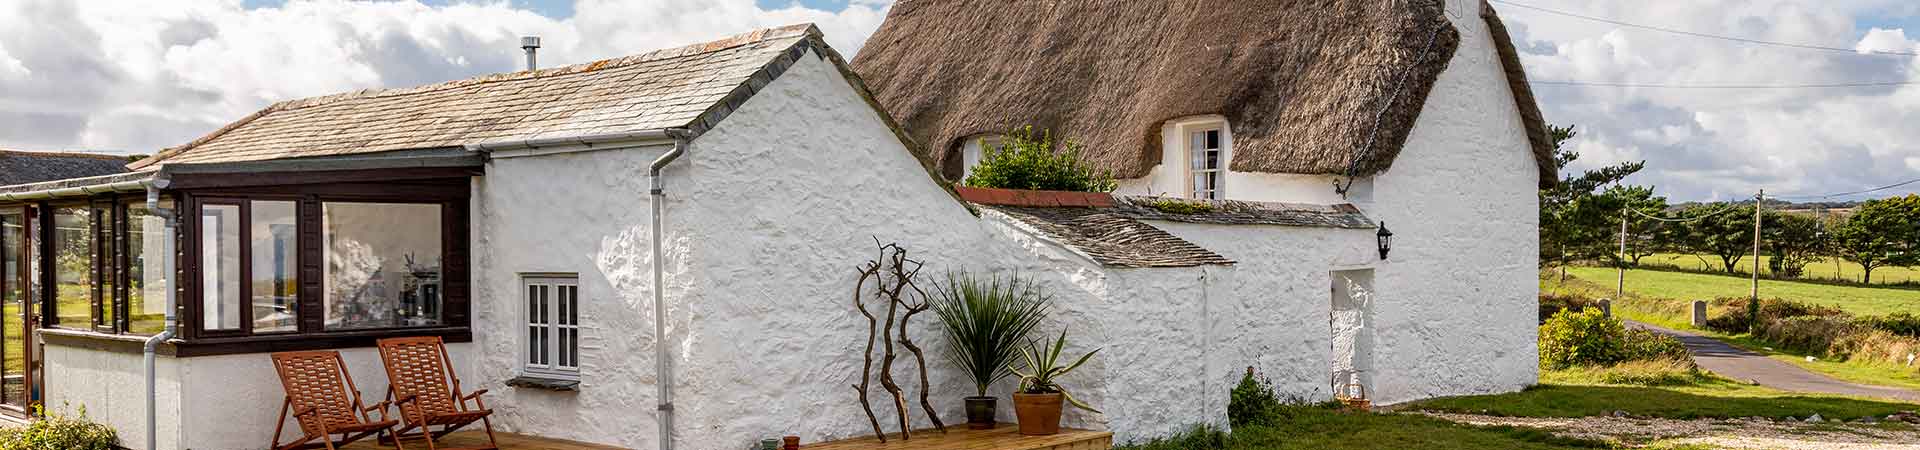 Thatched holiday cottages in Cumbria